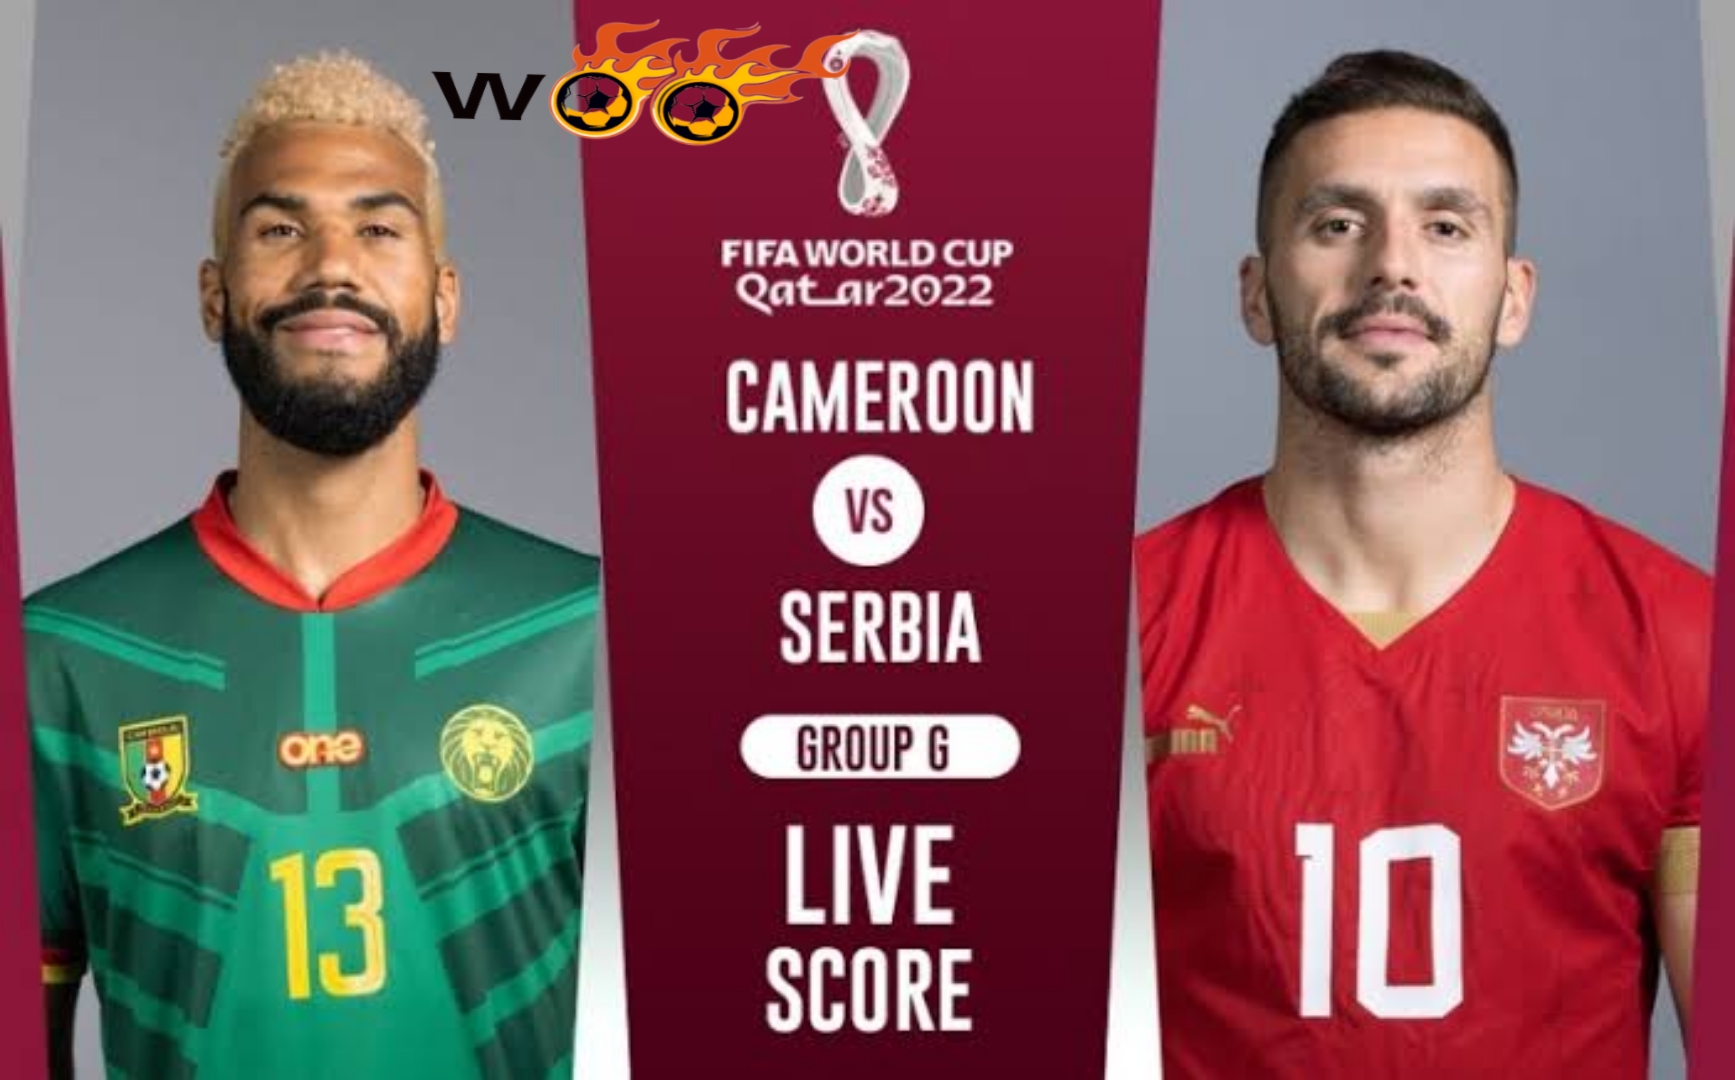 2022 World Cup Cameroon-Serbia Match Monday 11-28 Watch Dates